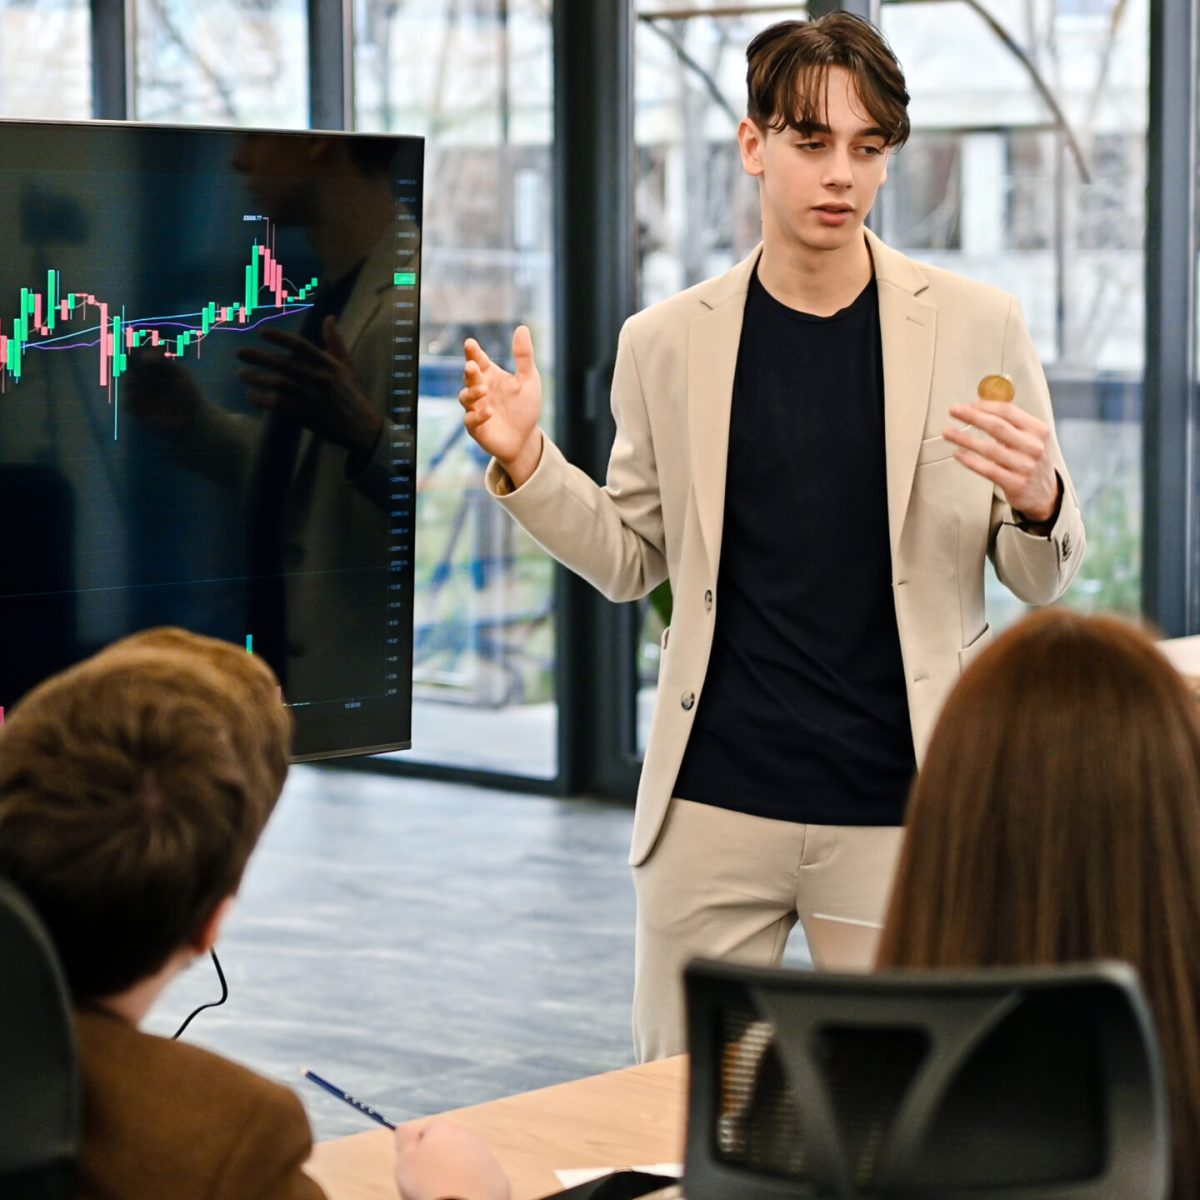 Young worker leading business meeting in an office, discussing the topic of cryptocurrencies with other workers using a big display with currency rate and physical coin